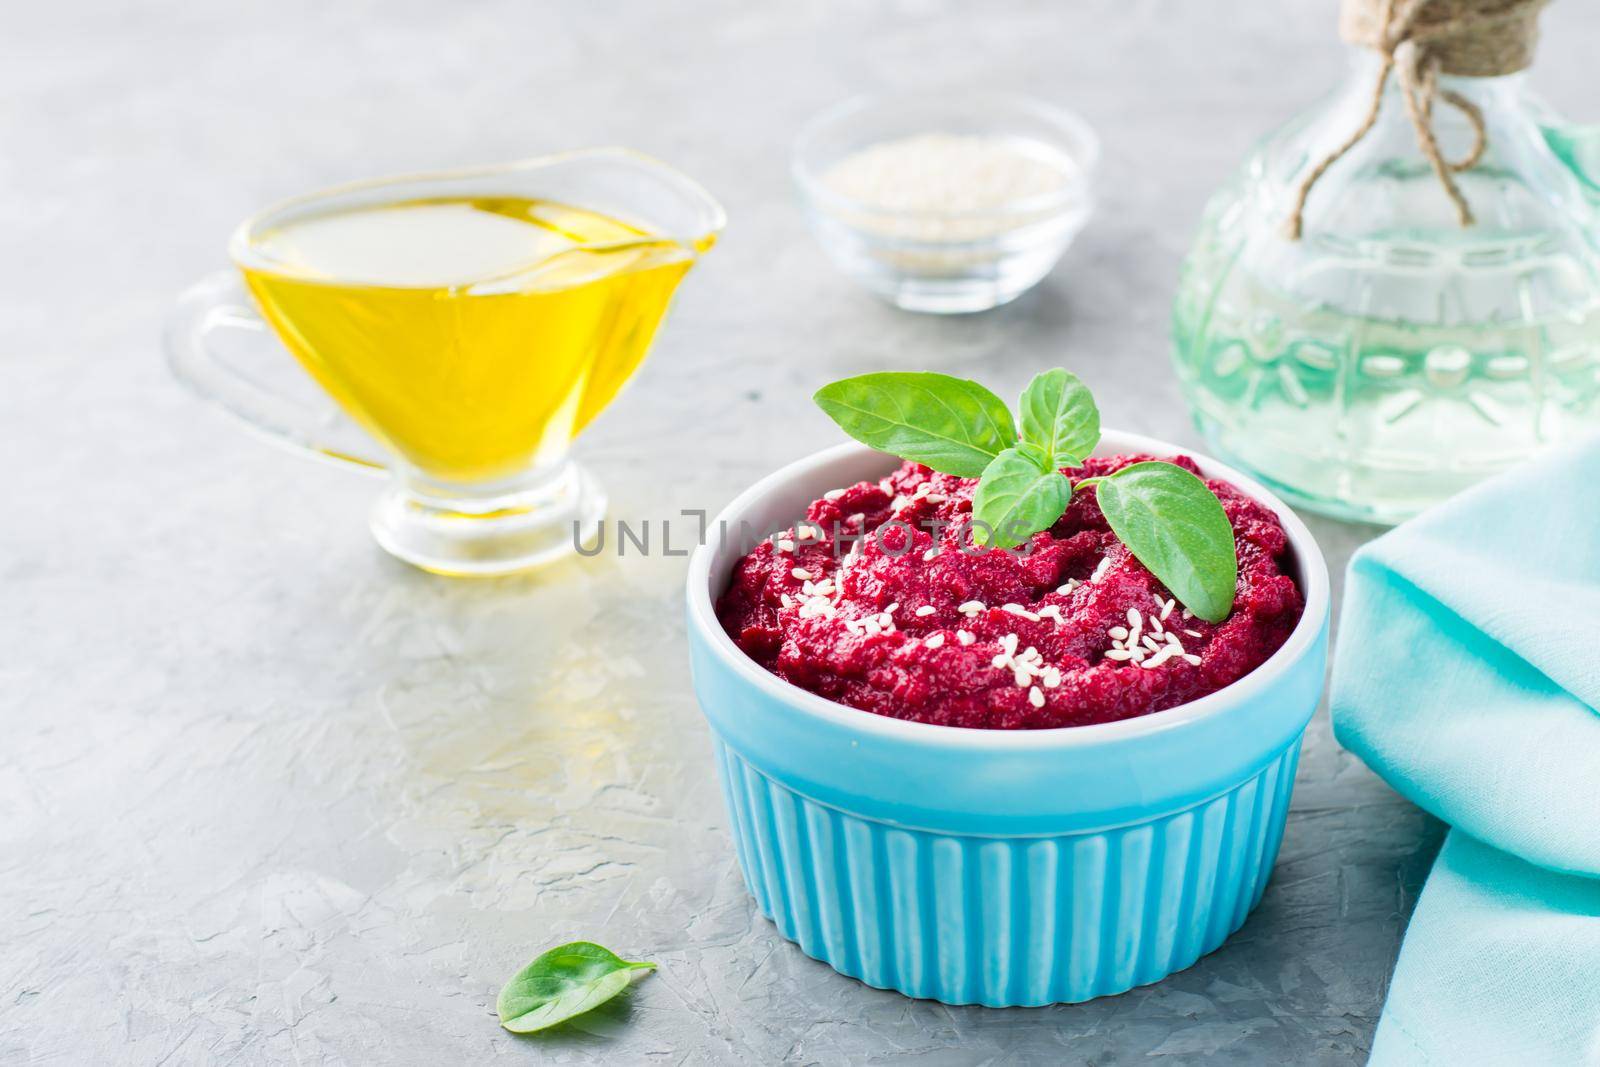 Baked beet hummus in a bowl with sesame seeds and basil on the table. Close-up by Aleruana